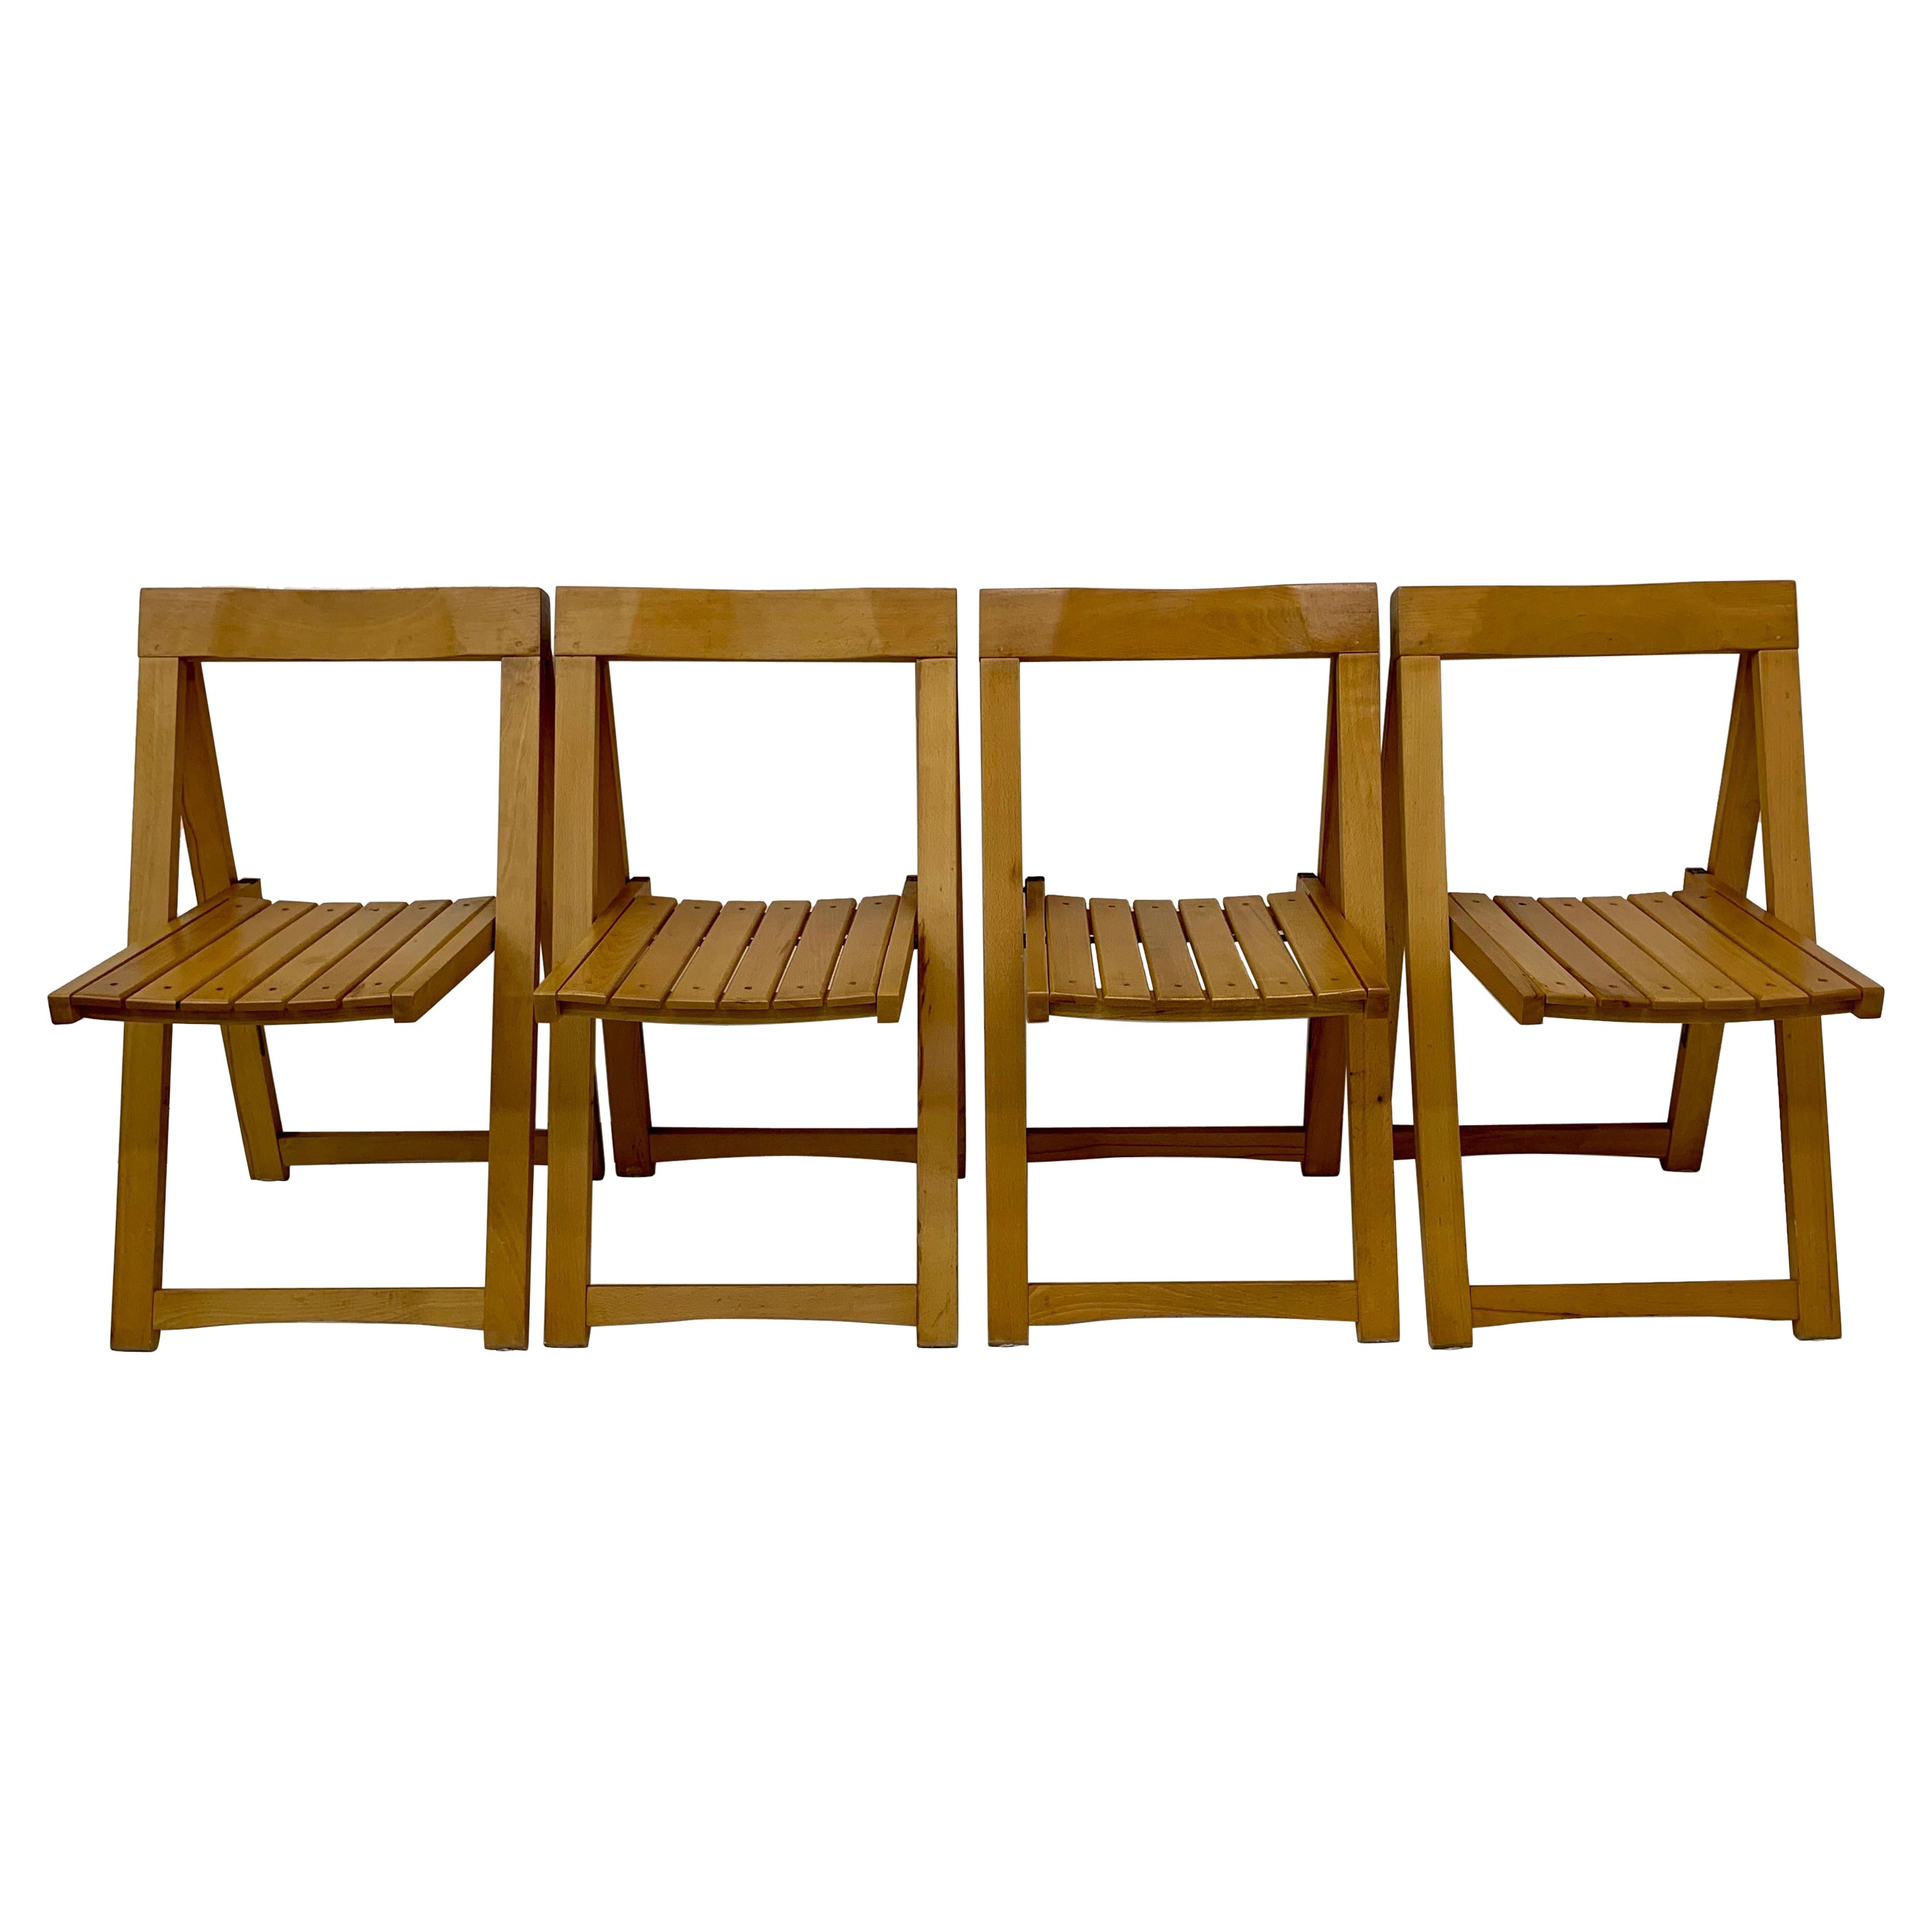 Set of 4 Aldo Jacober for Alberto Bazzani folding chairs, 1960’s For Sale